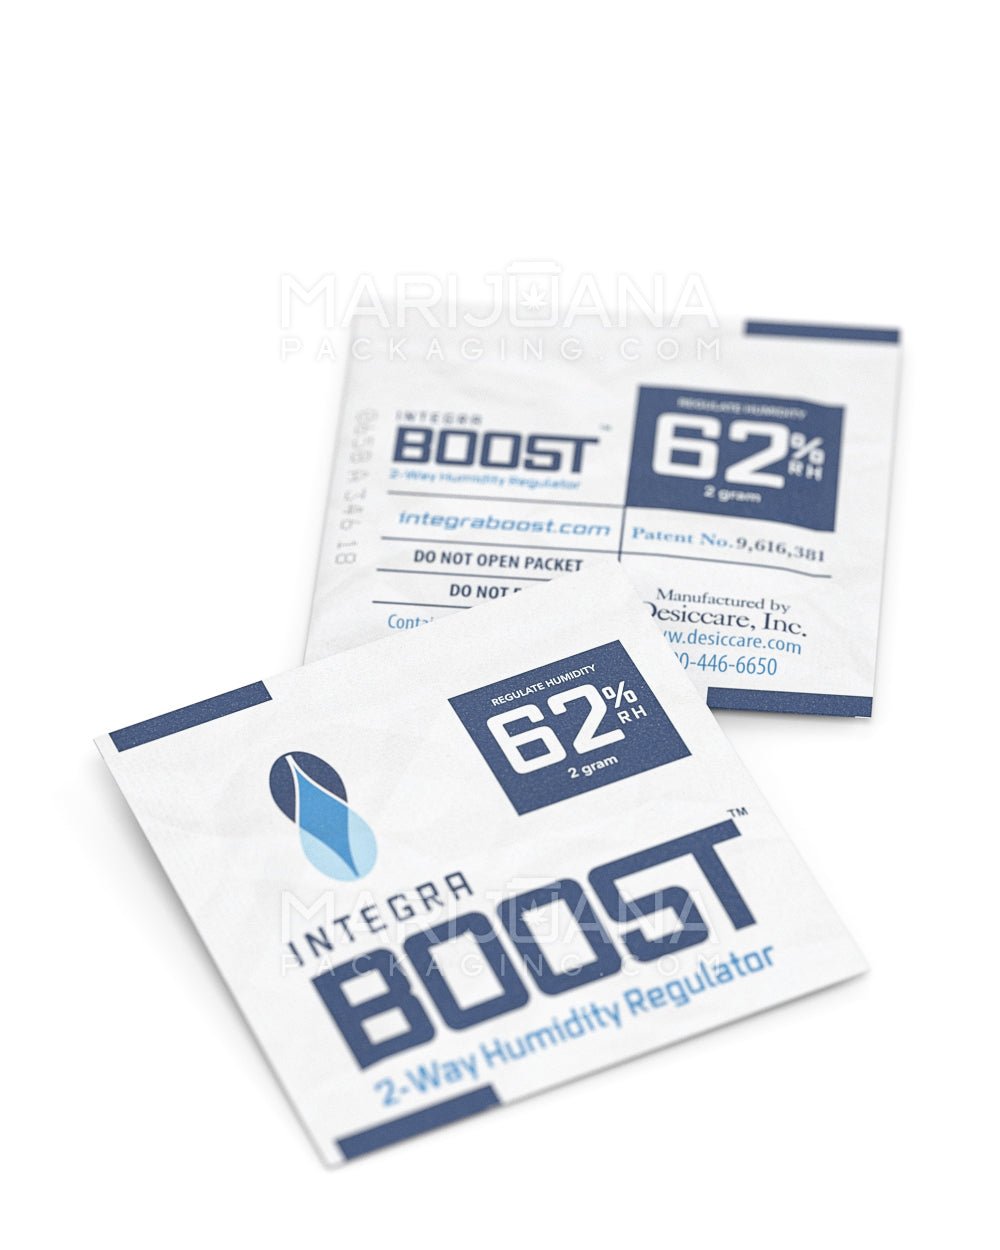 INTEGRA | Boost Humidity Control Packs | 2 Grams - 62% - 2000 Count - 5